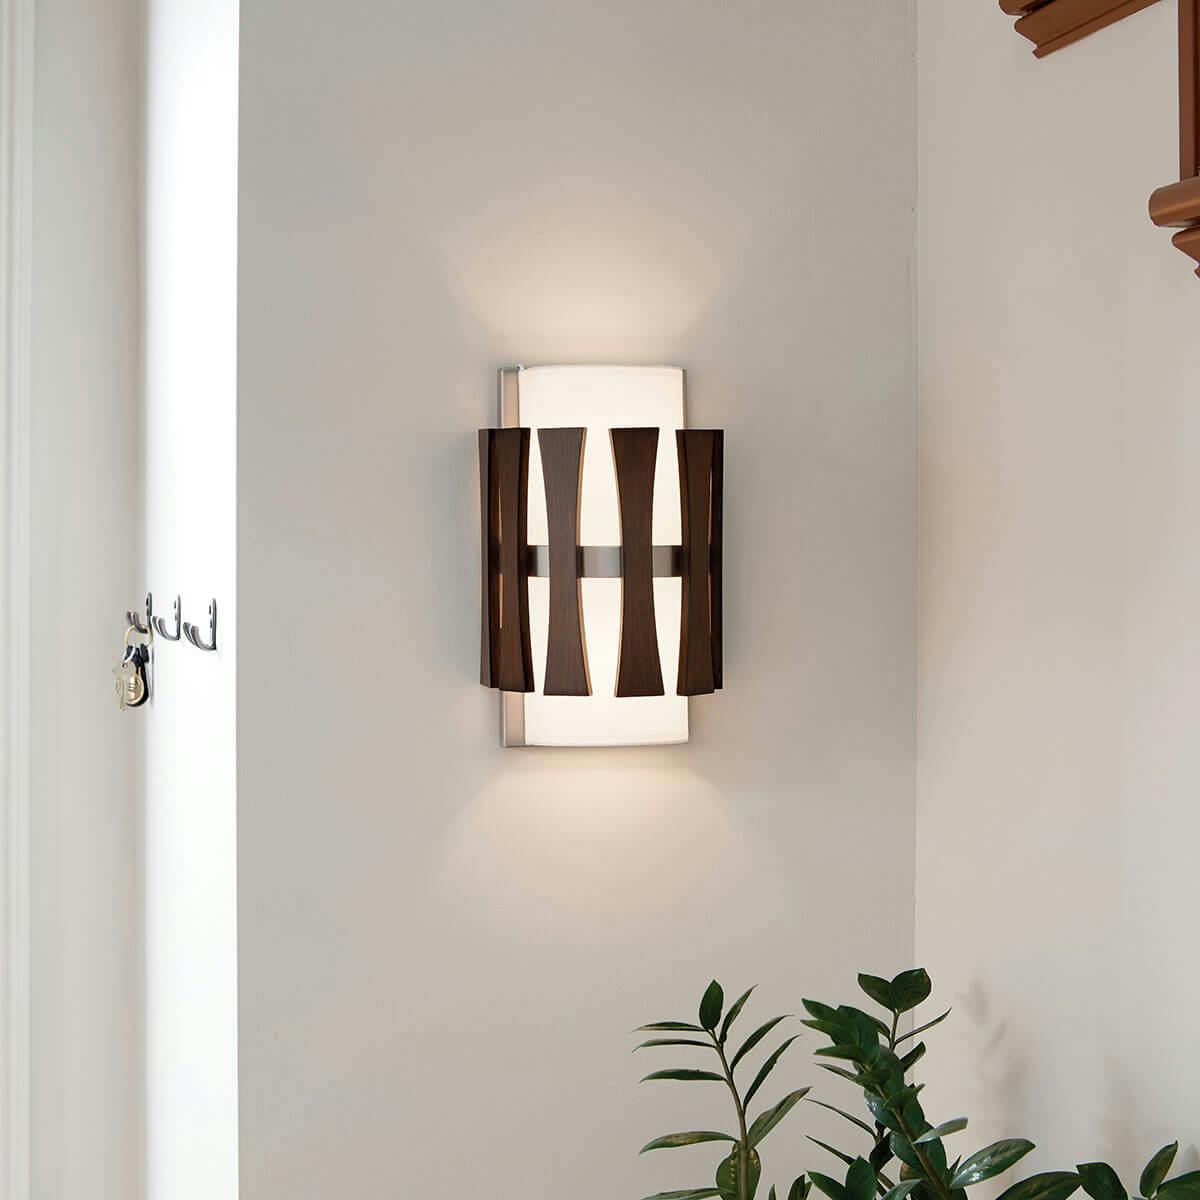 Day time Hallway image featuring Cirus wall sconce 43756AUB